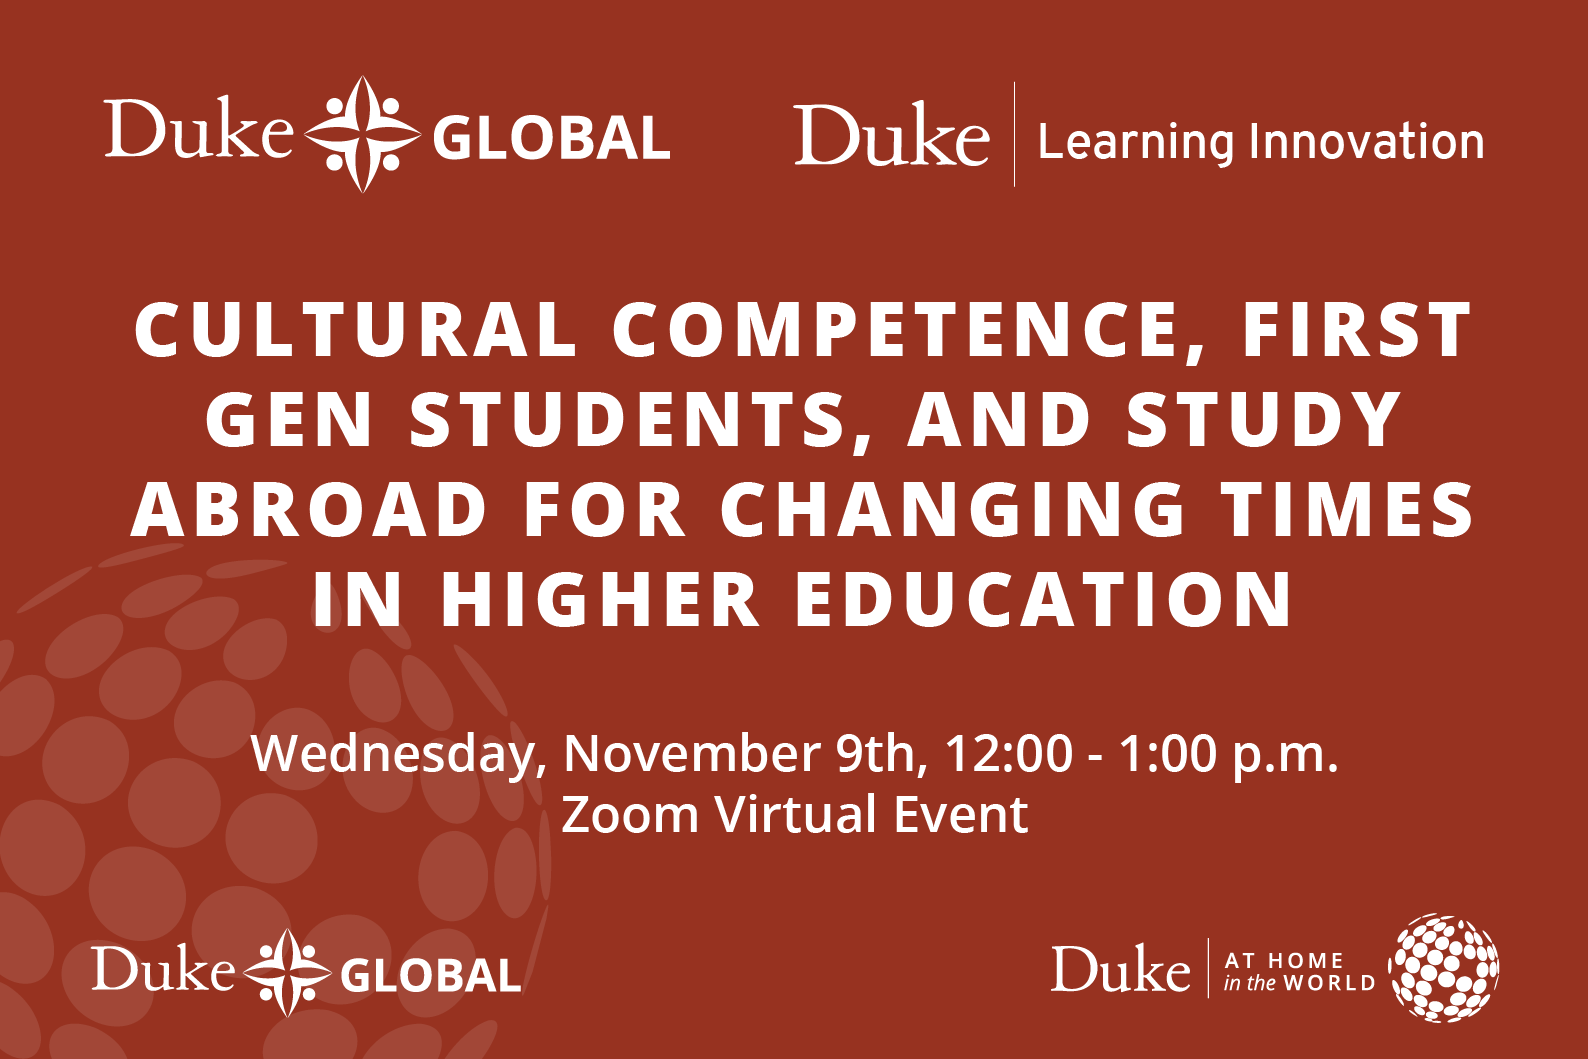 Cultural Competence, First Gen students, and Study Abroad for Changing Times in Higher Education, Wednesday, November 9th, 12:00 - 1:00 p.m.